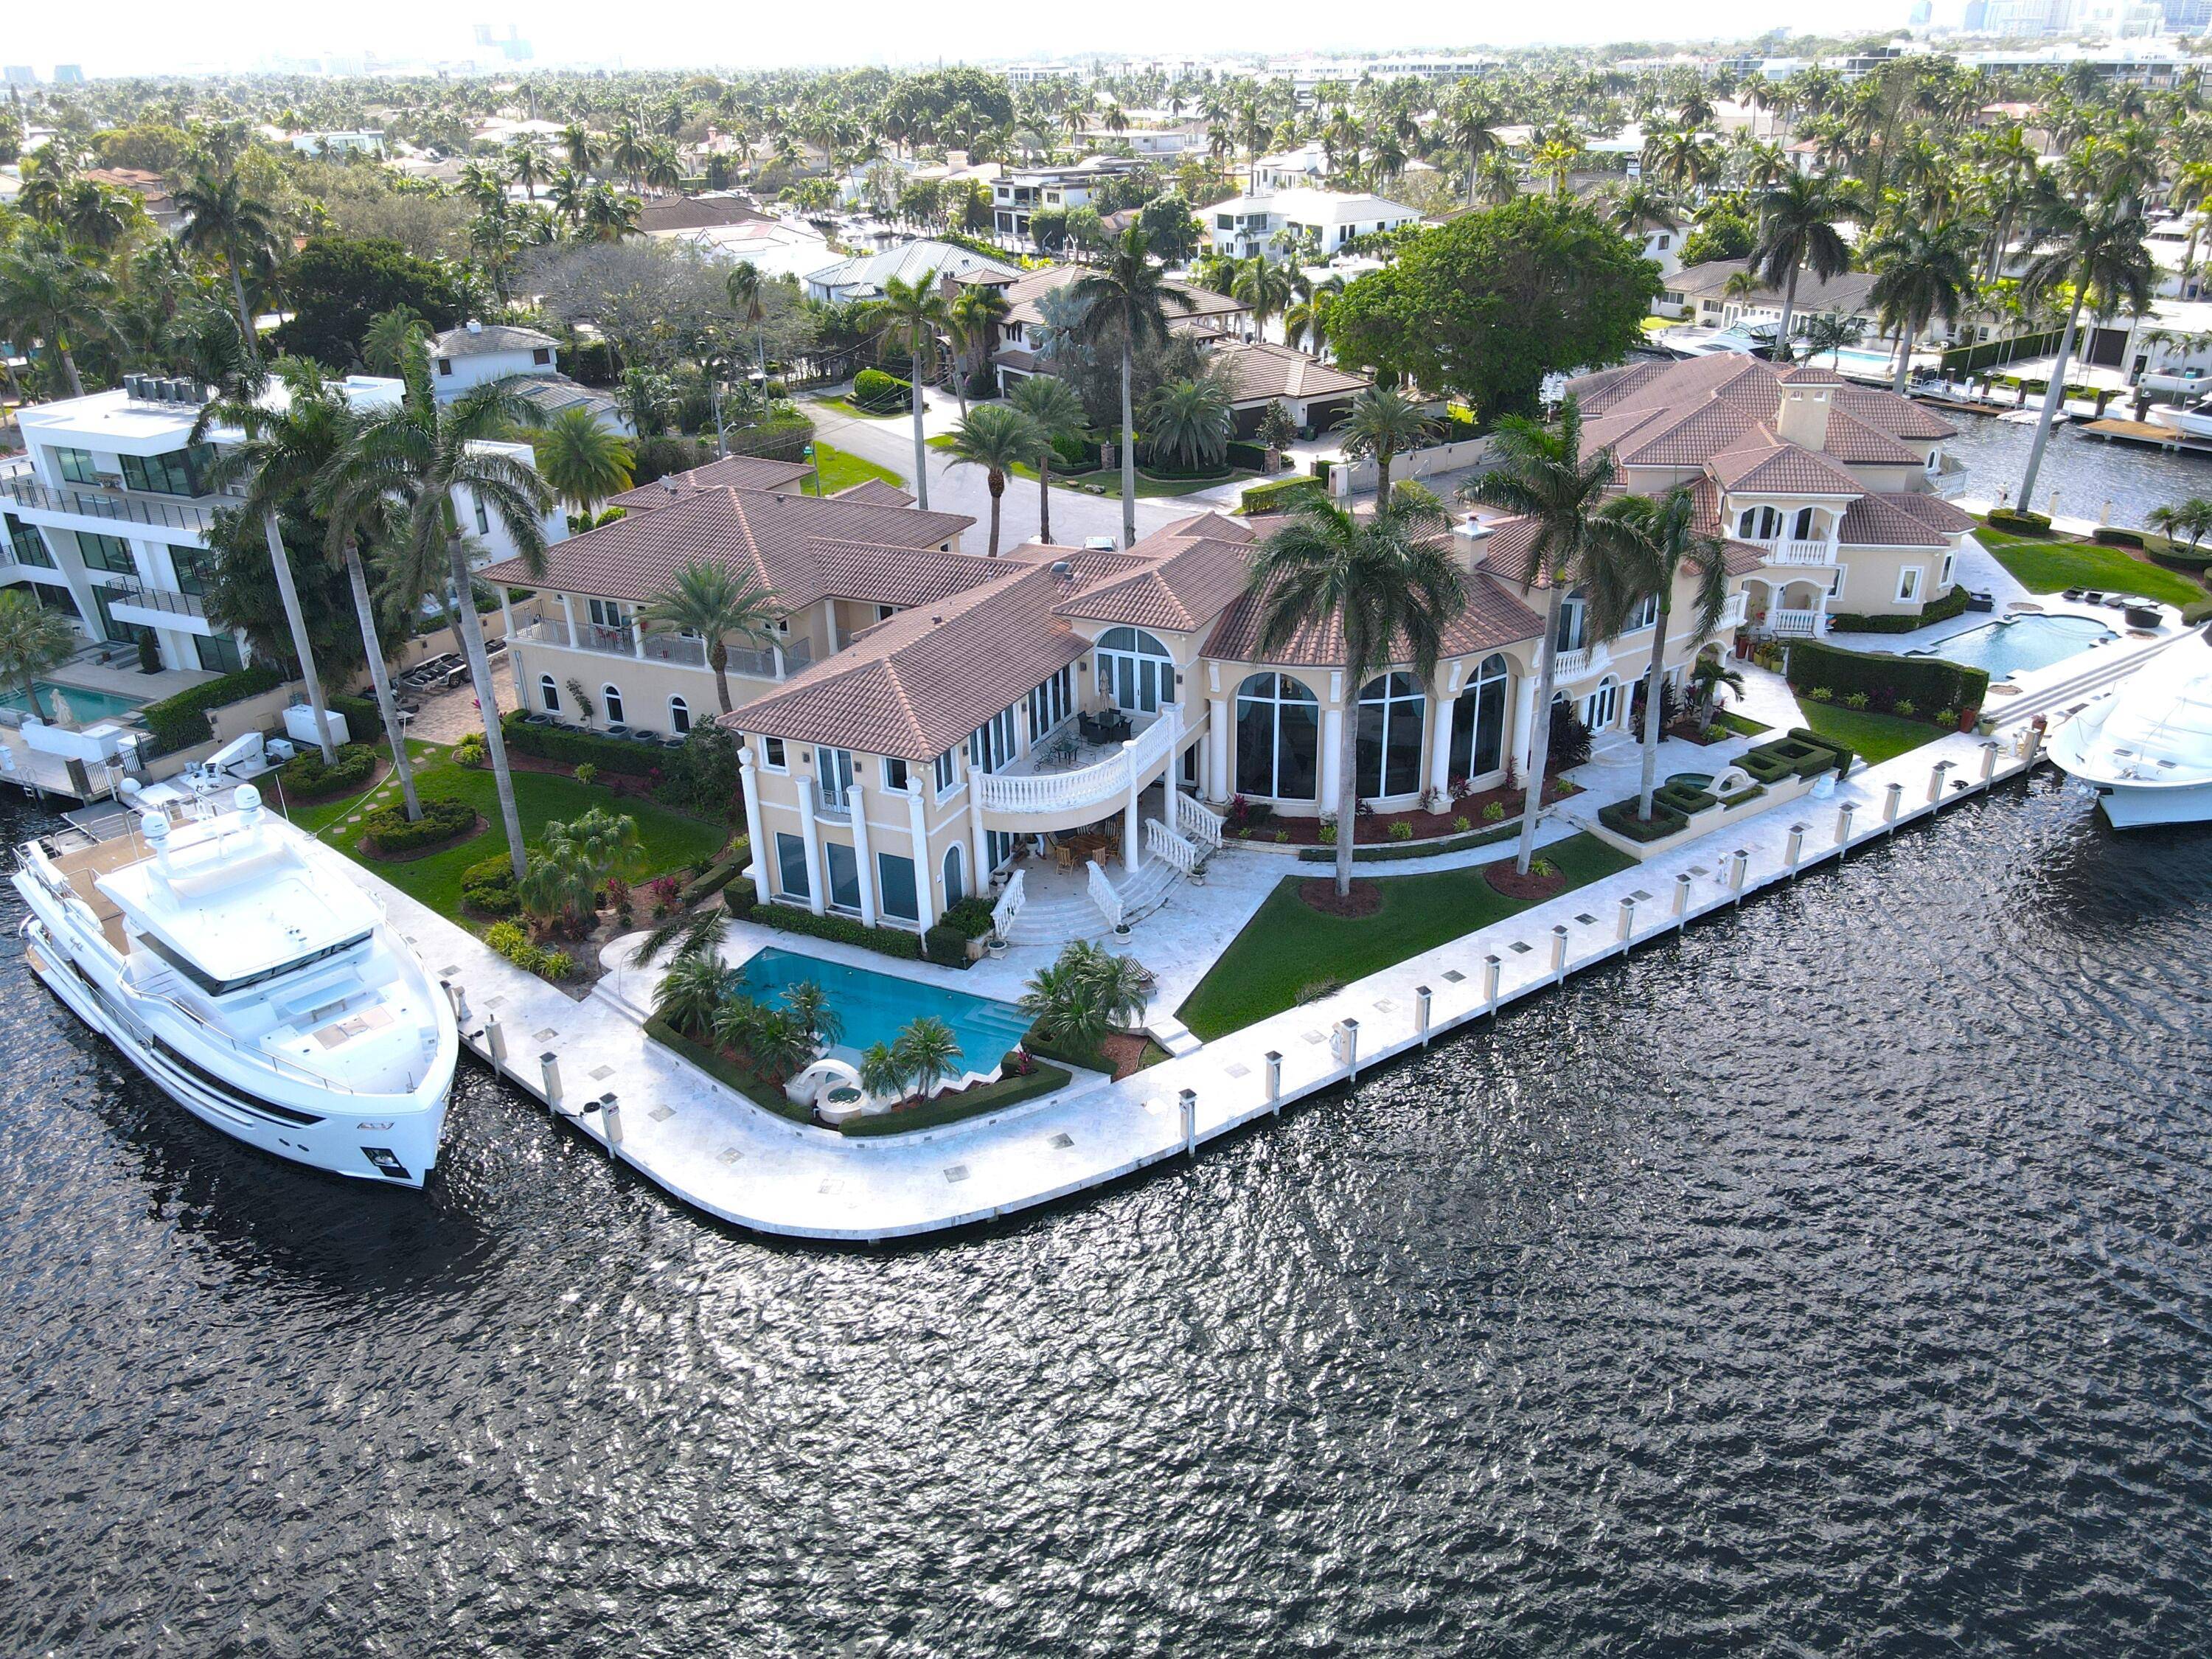 Experience the pinnacle of waterfront luxury with this exceptional point lot, boasting breathtaking views of the Rio Barcelona Canal and the Intracoastal.